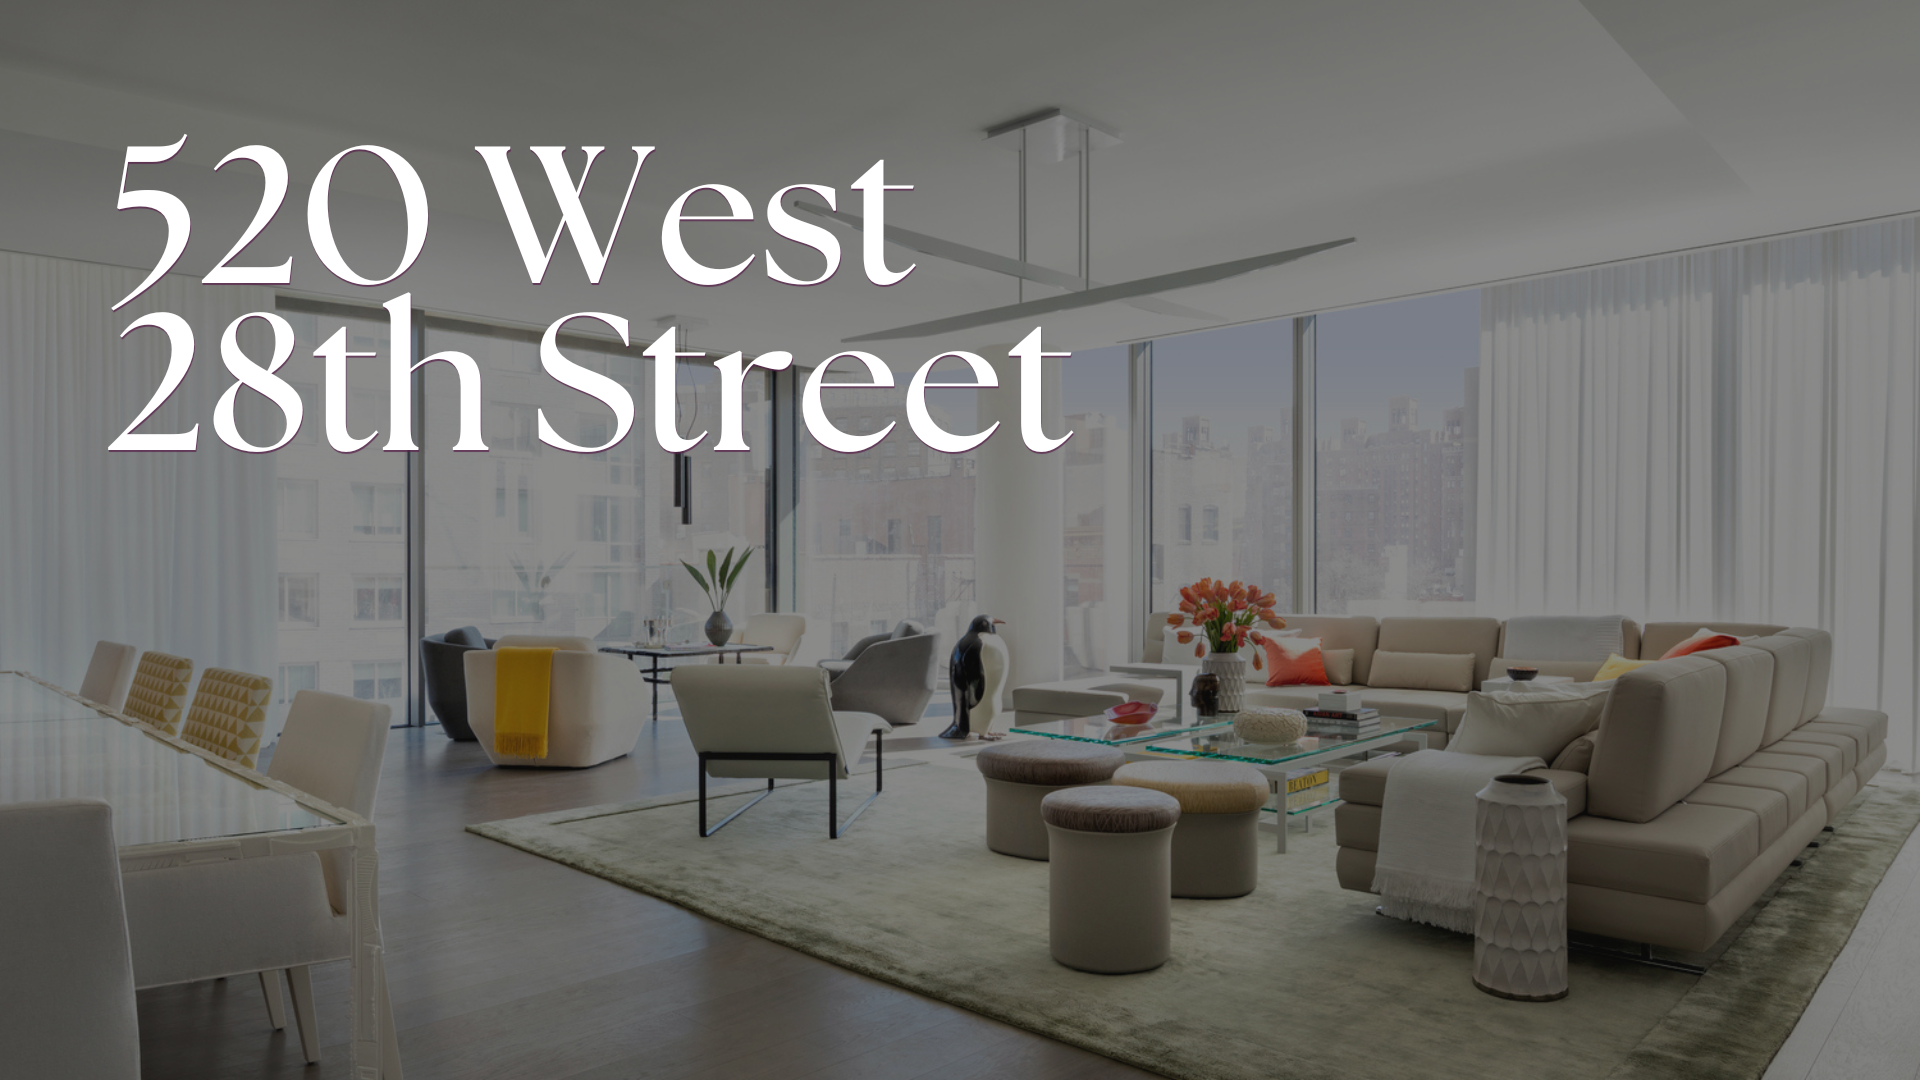 benefits-at-520west-28street